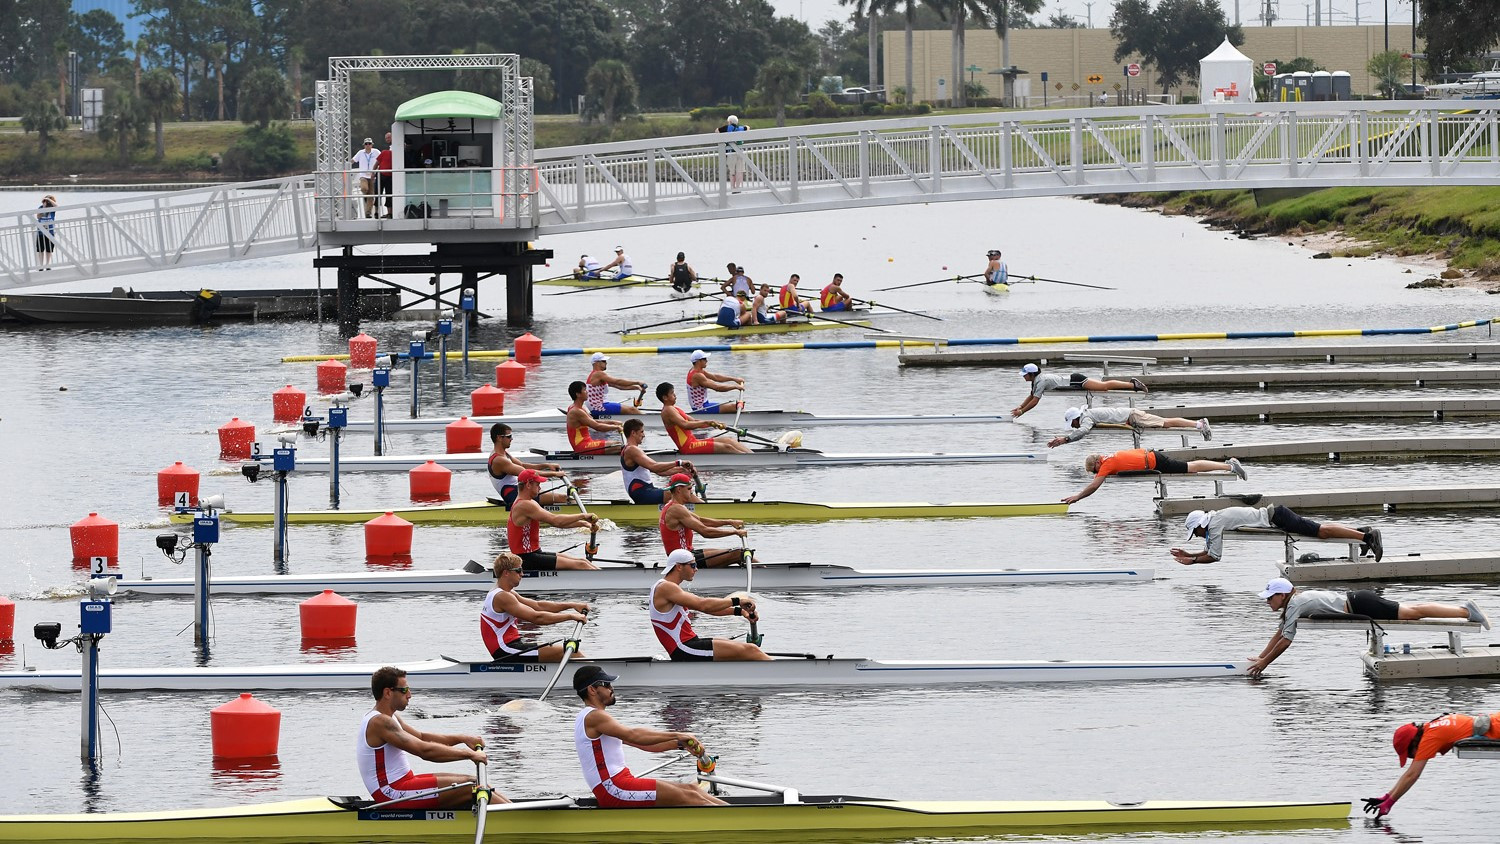 Thornley continues singles sculls form at World Rowing Championships